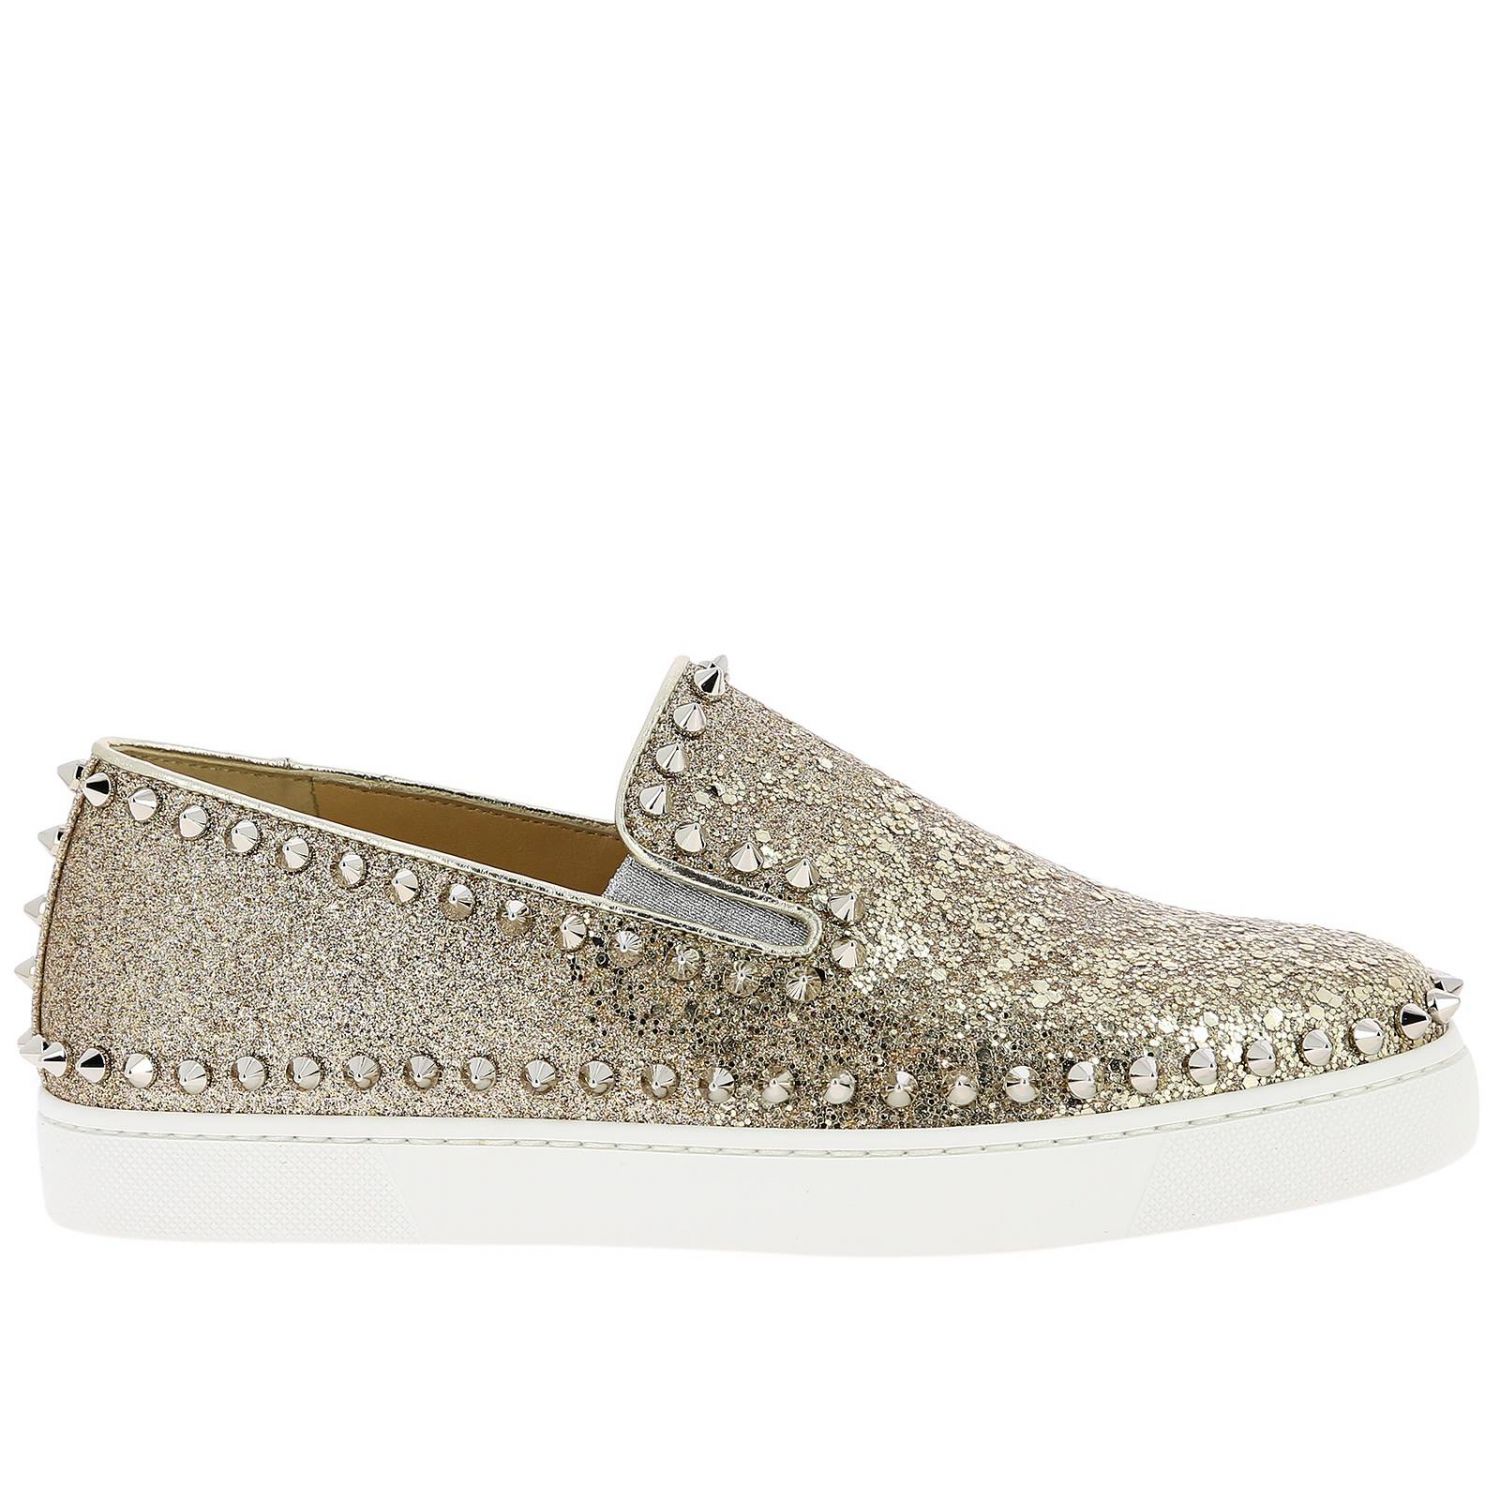 CHRISTIAN LOUBOUTIN: Pik boat slip on glitter leather sneakers with ...